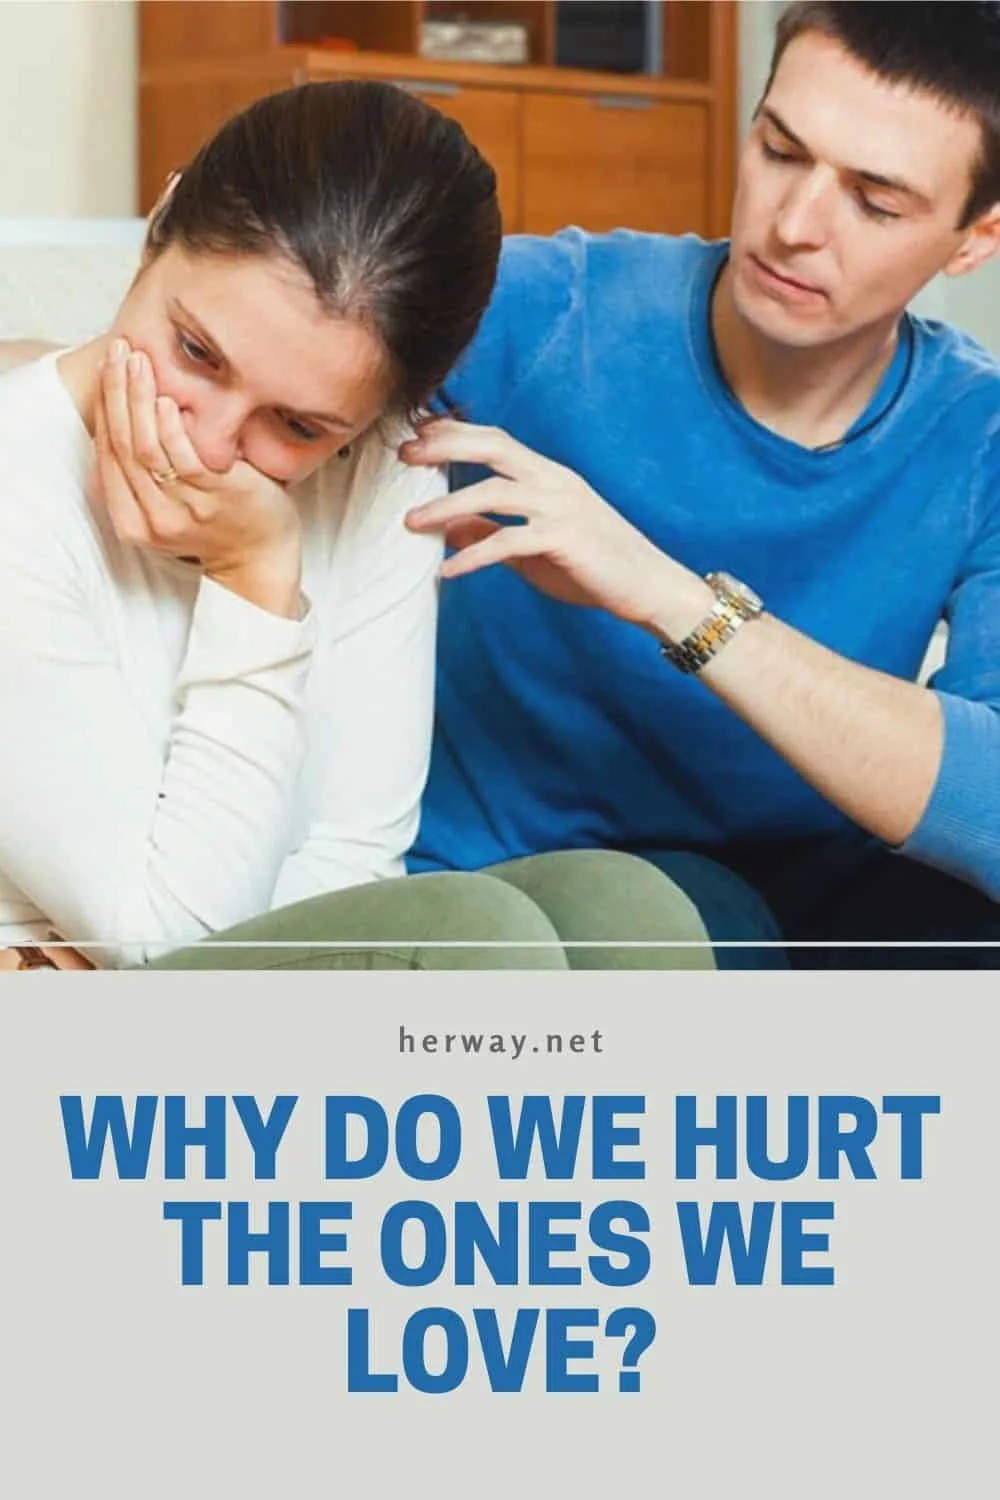 WHY DO WE HURT THE ONES WE LOVE?